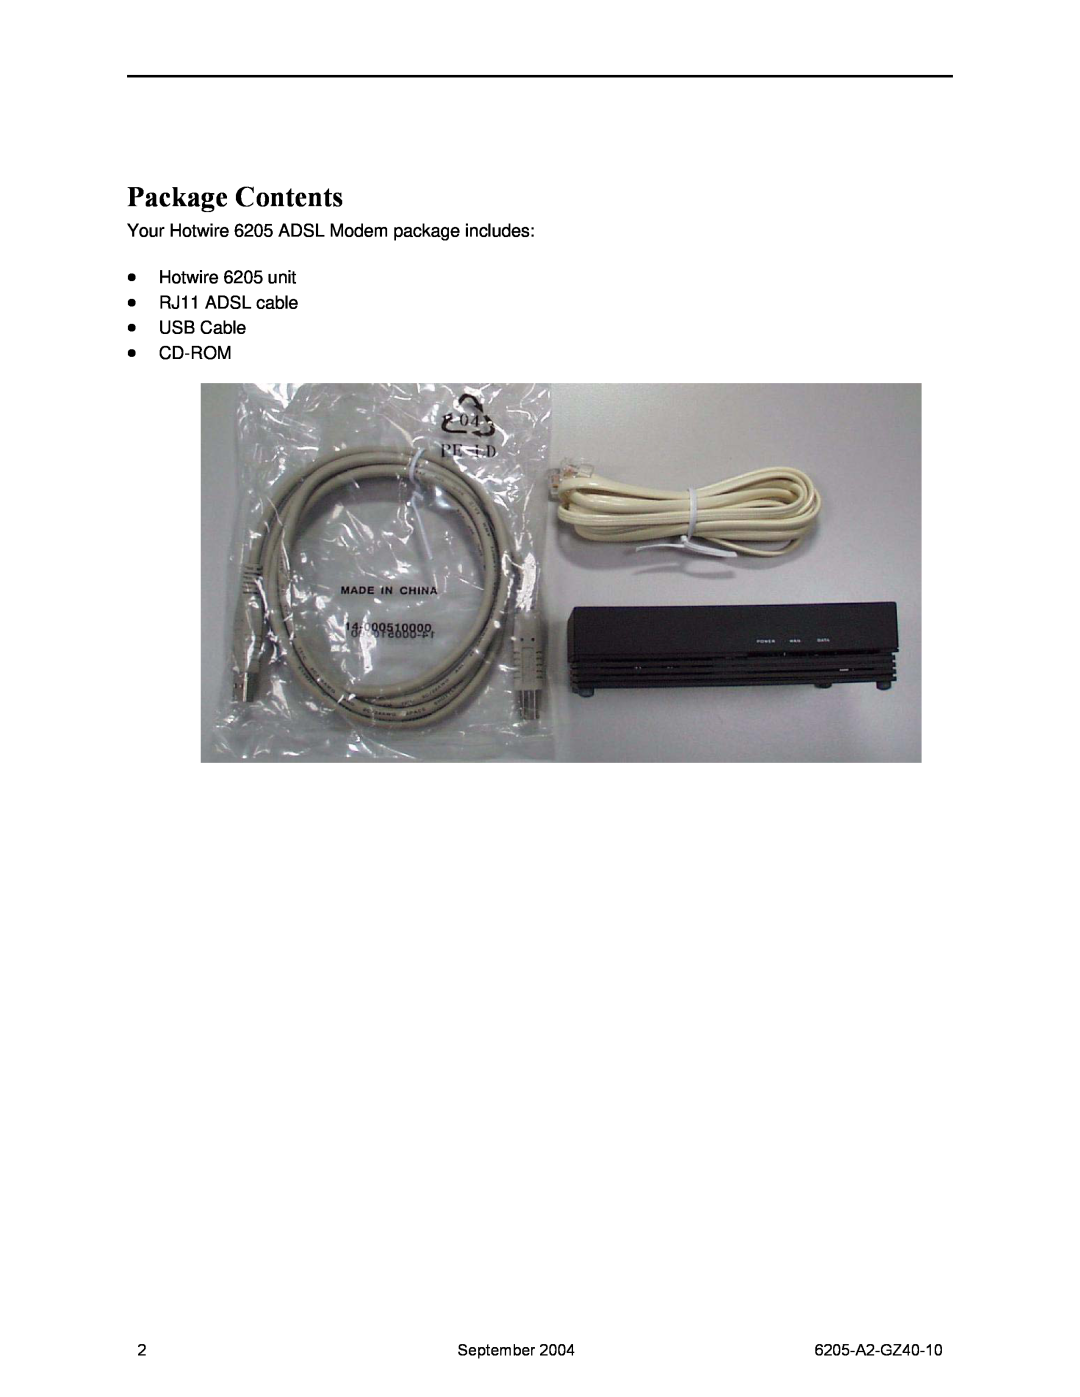 Paradyne Package Contents, Your Hotwire 6205 ADSL Modem package includes Hotwire 6205 unit, September, 6205-A2-GZ40-10 